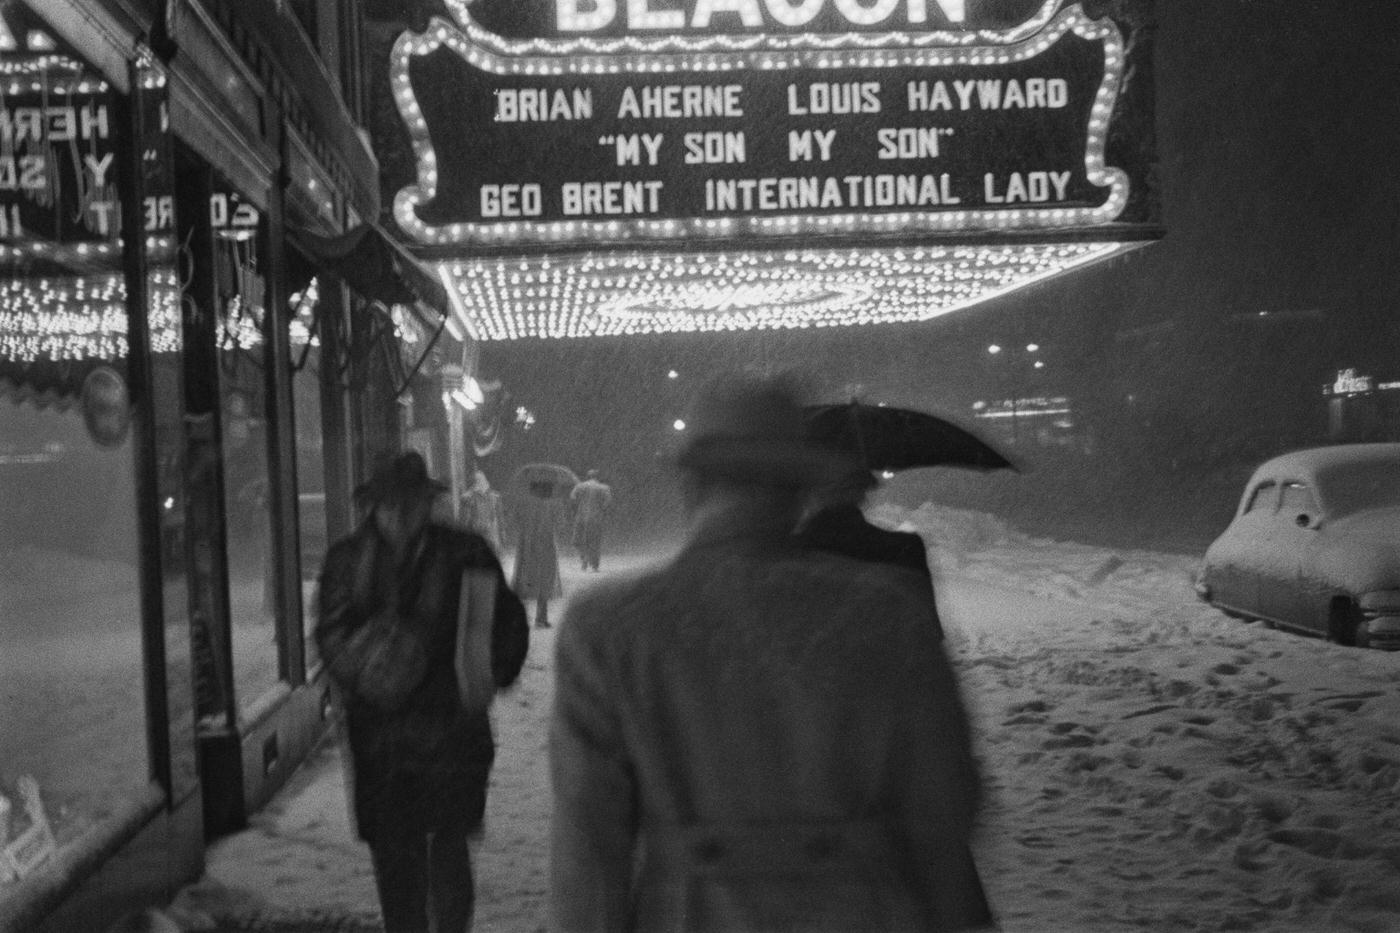 Pedestrians Walk Along The Snow-Covered Sidewalk Outside The Beacon Theatre On Broadway, Manhattan, 1941.